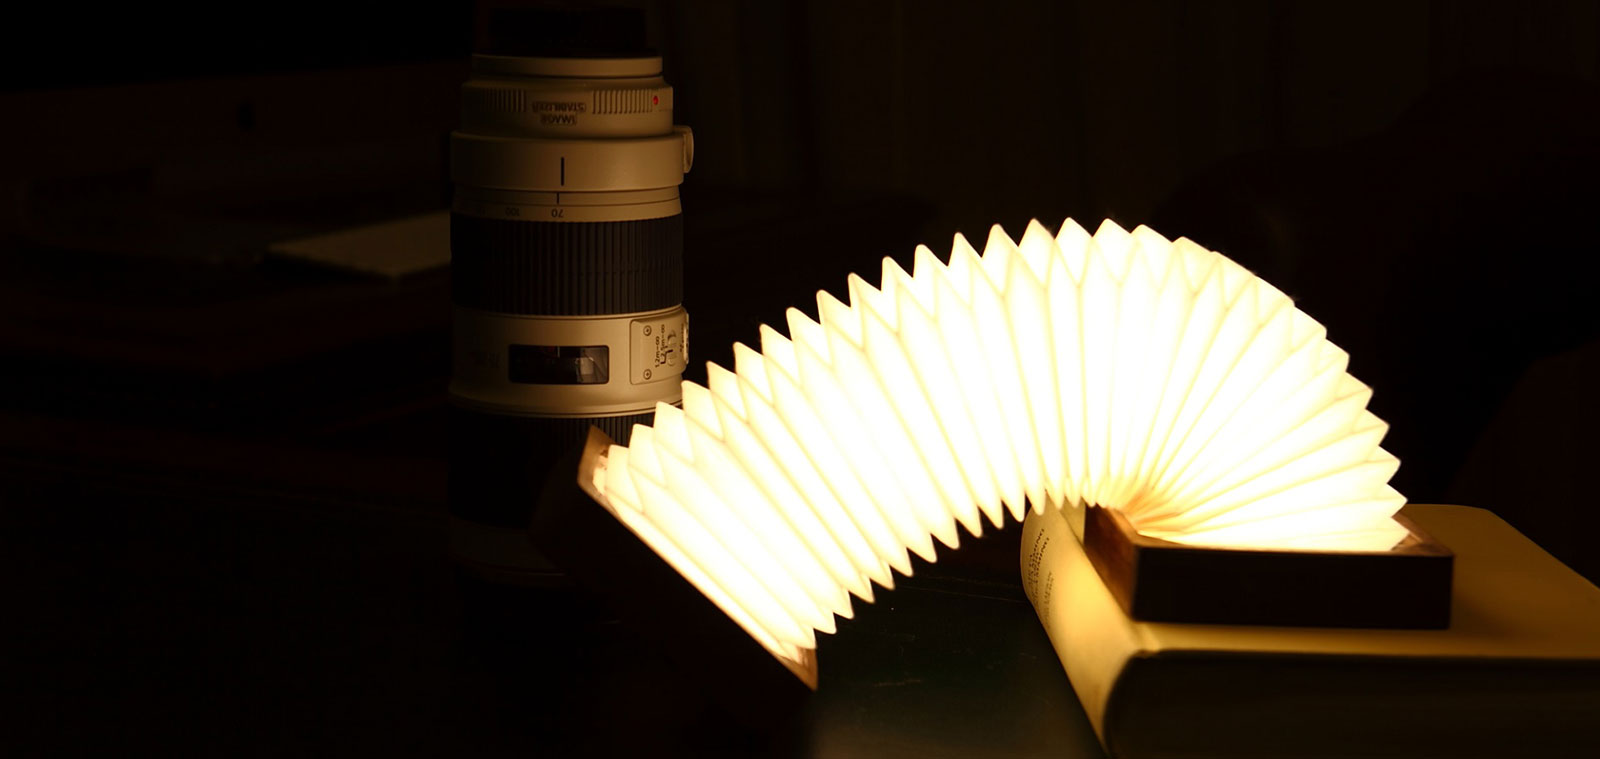 Orilamp-Origami-Inspired-Smart-Lamp-with-app